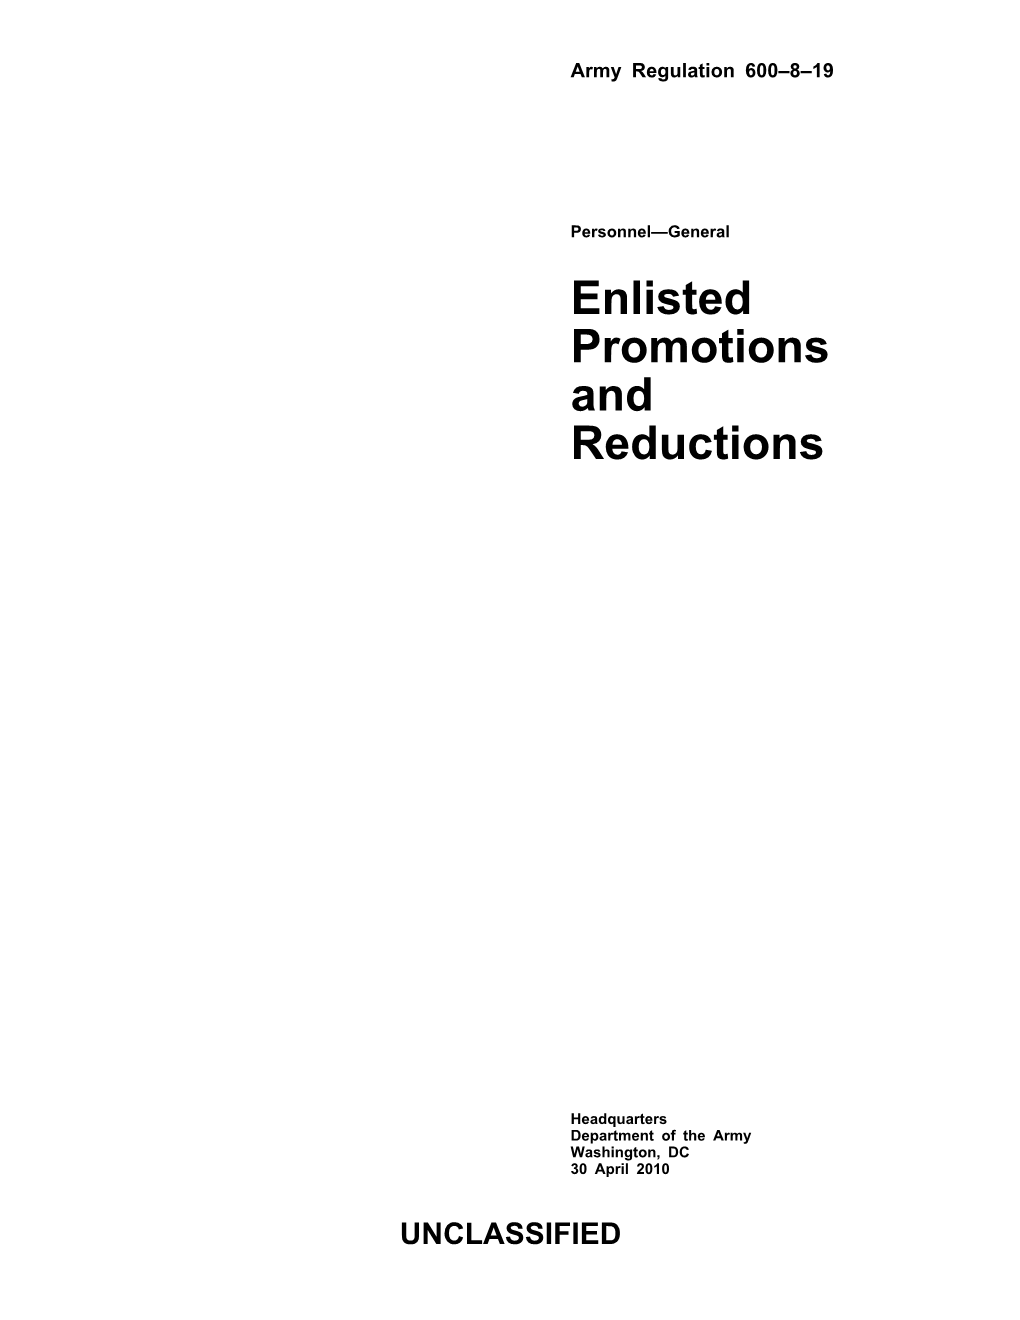 Enlisted Promotions and Reductions